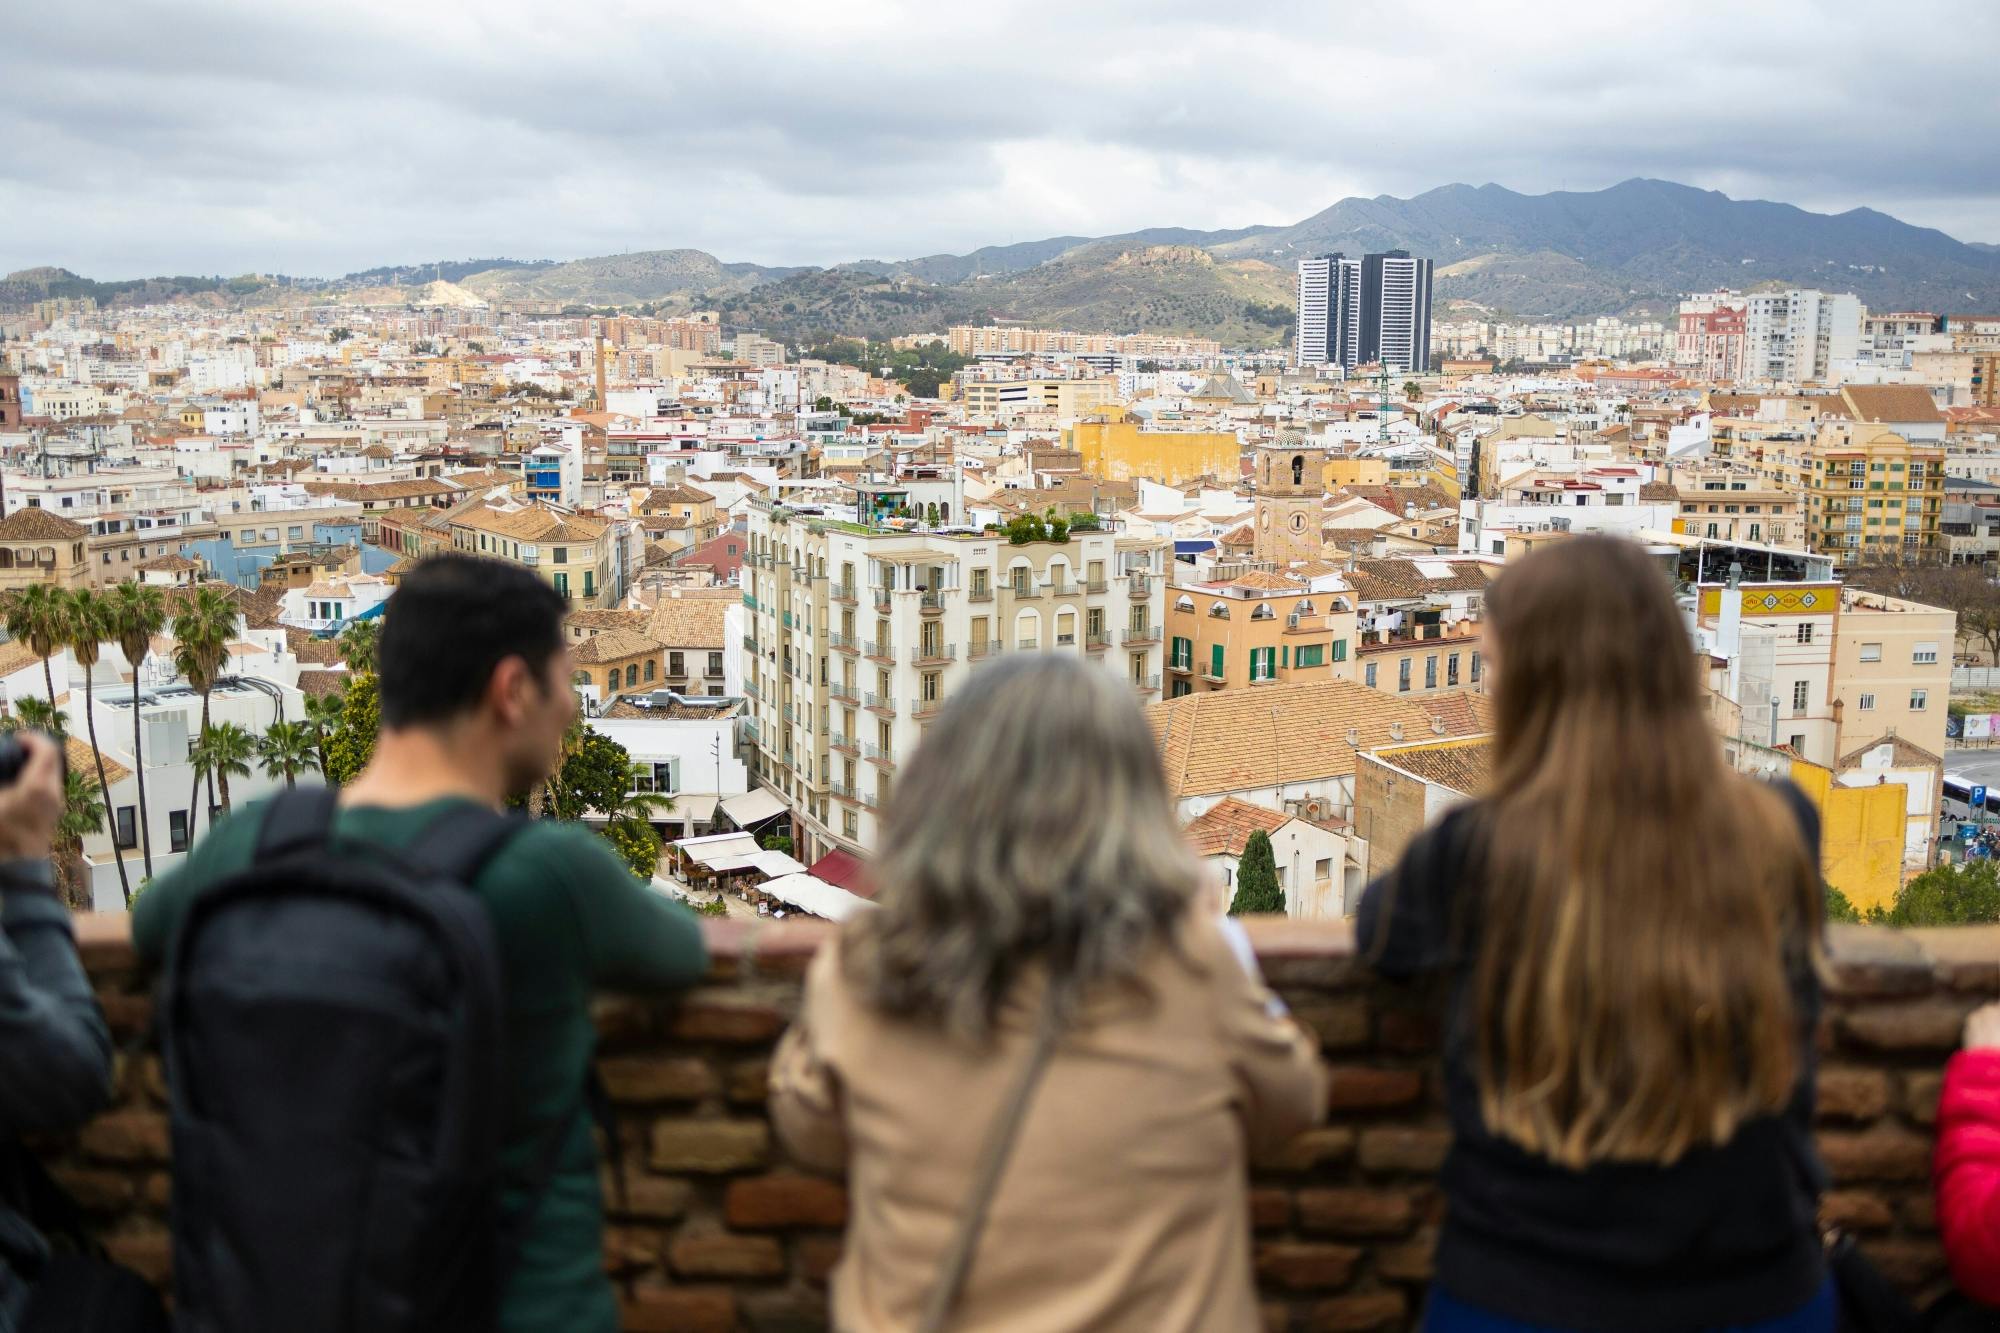 Nat Geo Day Tour: Echoes of Al-Andalus in Malaga